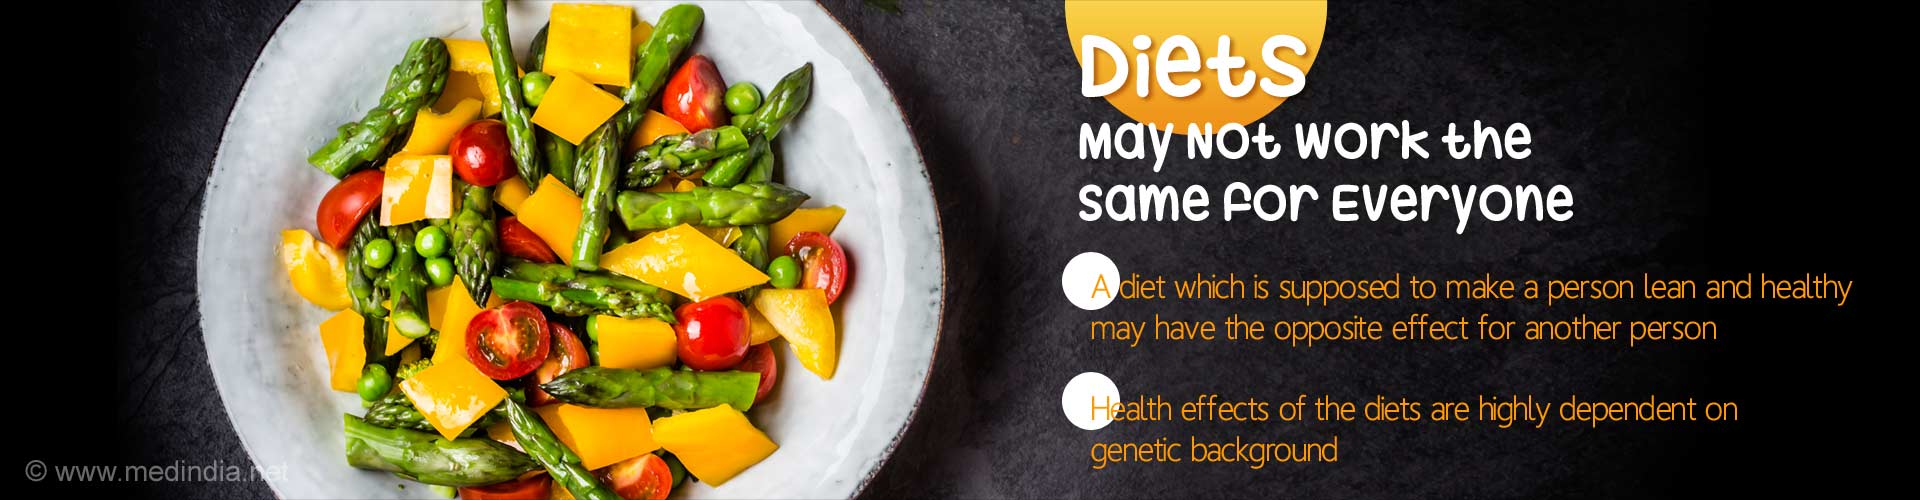 diets may not work the same for everyone
- a diet which is supposed to make a person lean and healthy may have the opposite effect for another person
- health effects of the diets are highly dependent on genetic background
